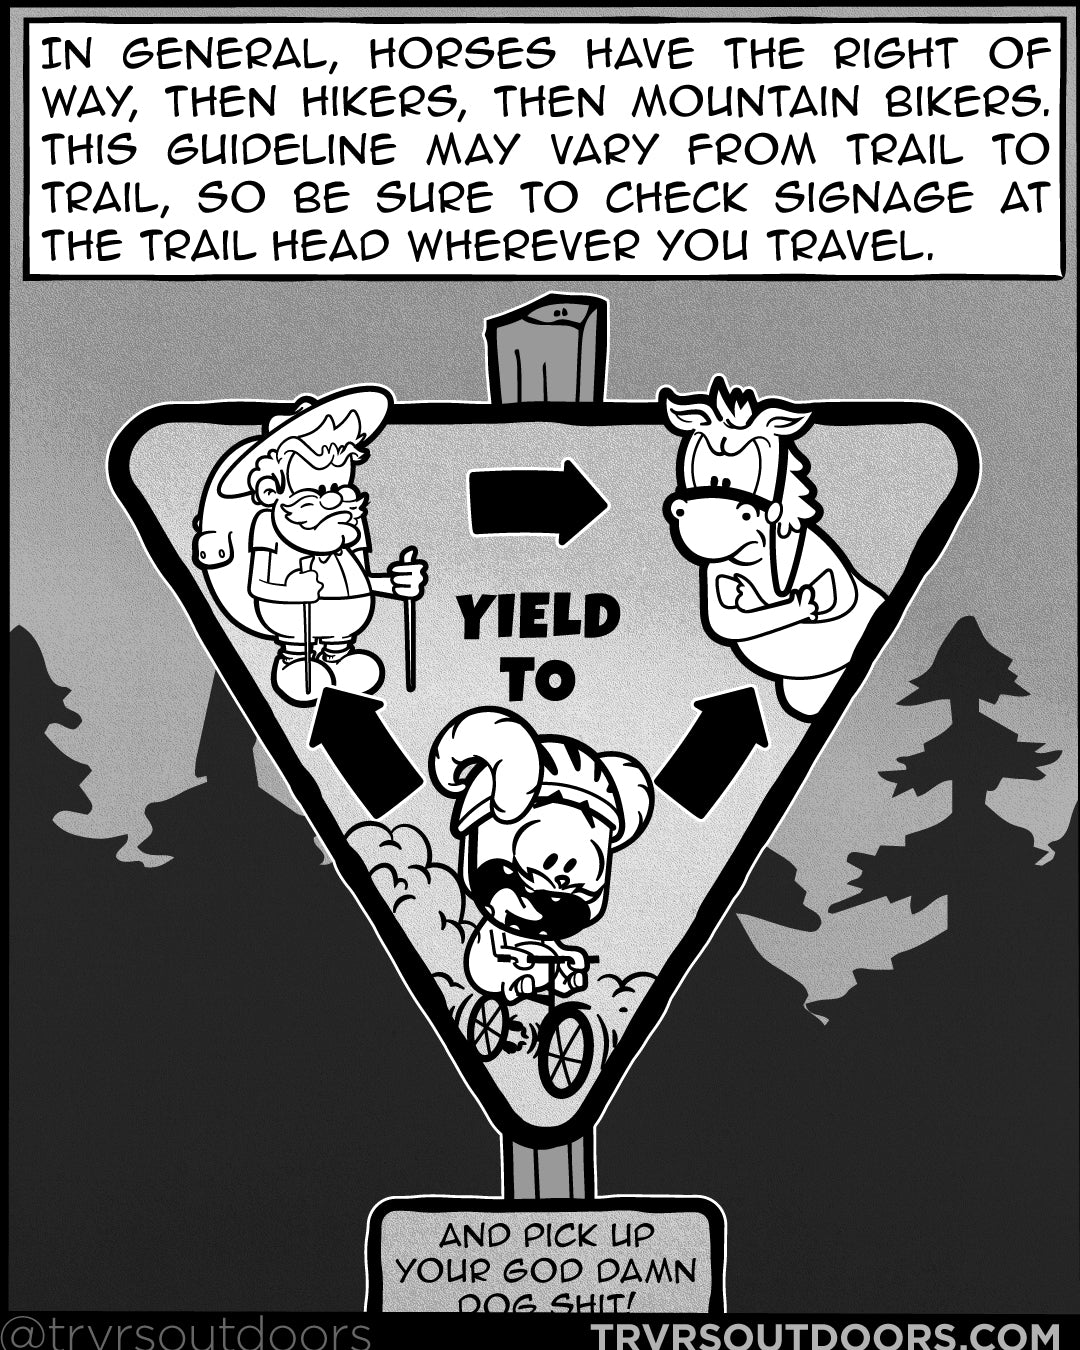 Yield To Hiking Sign - The Right Of Way, The Adventures Of Lambert Comic Series | TRVRS Outdoors